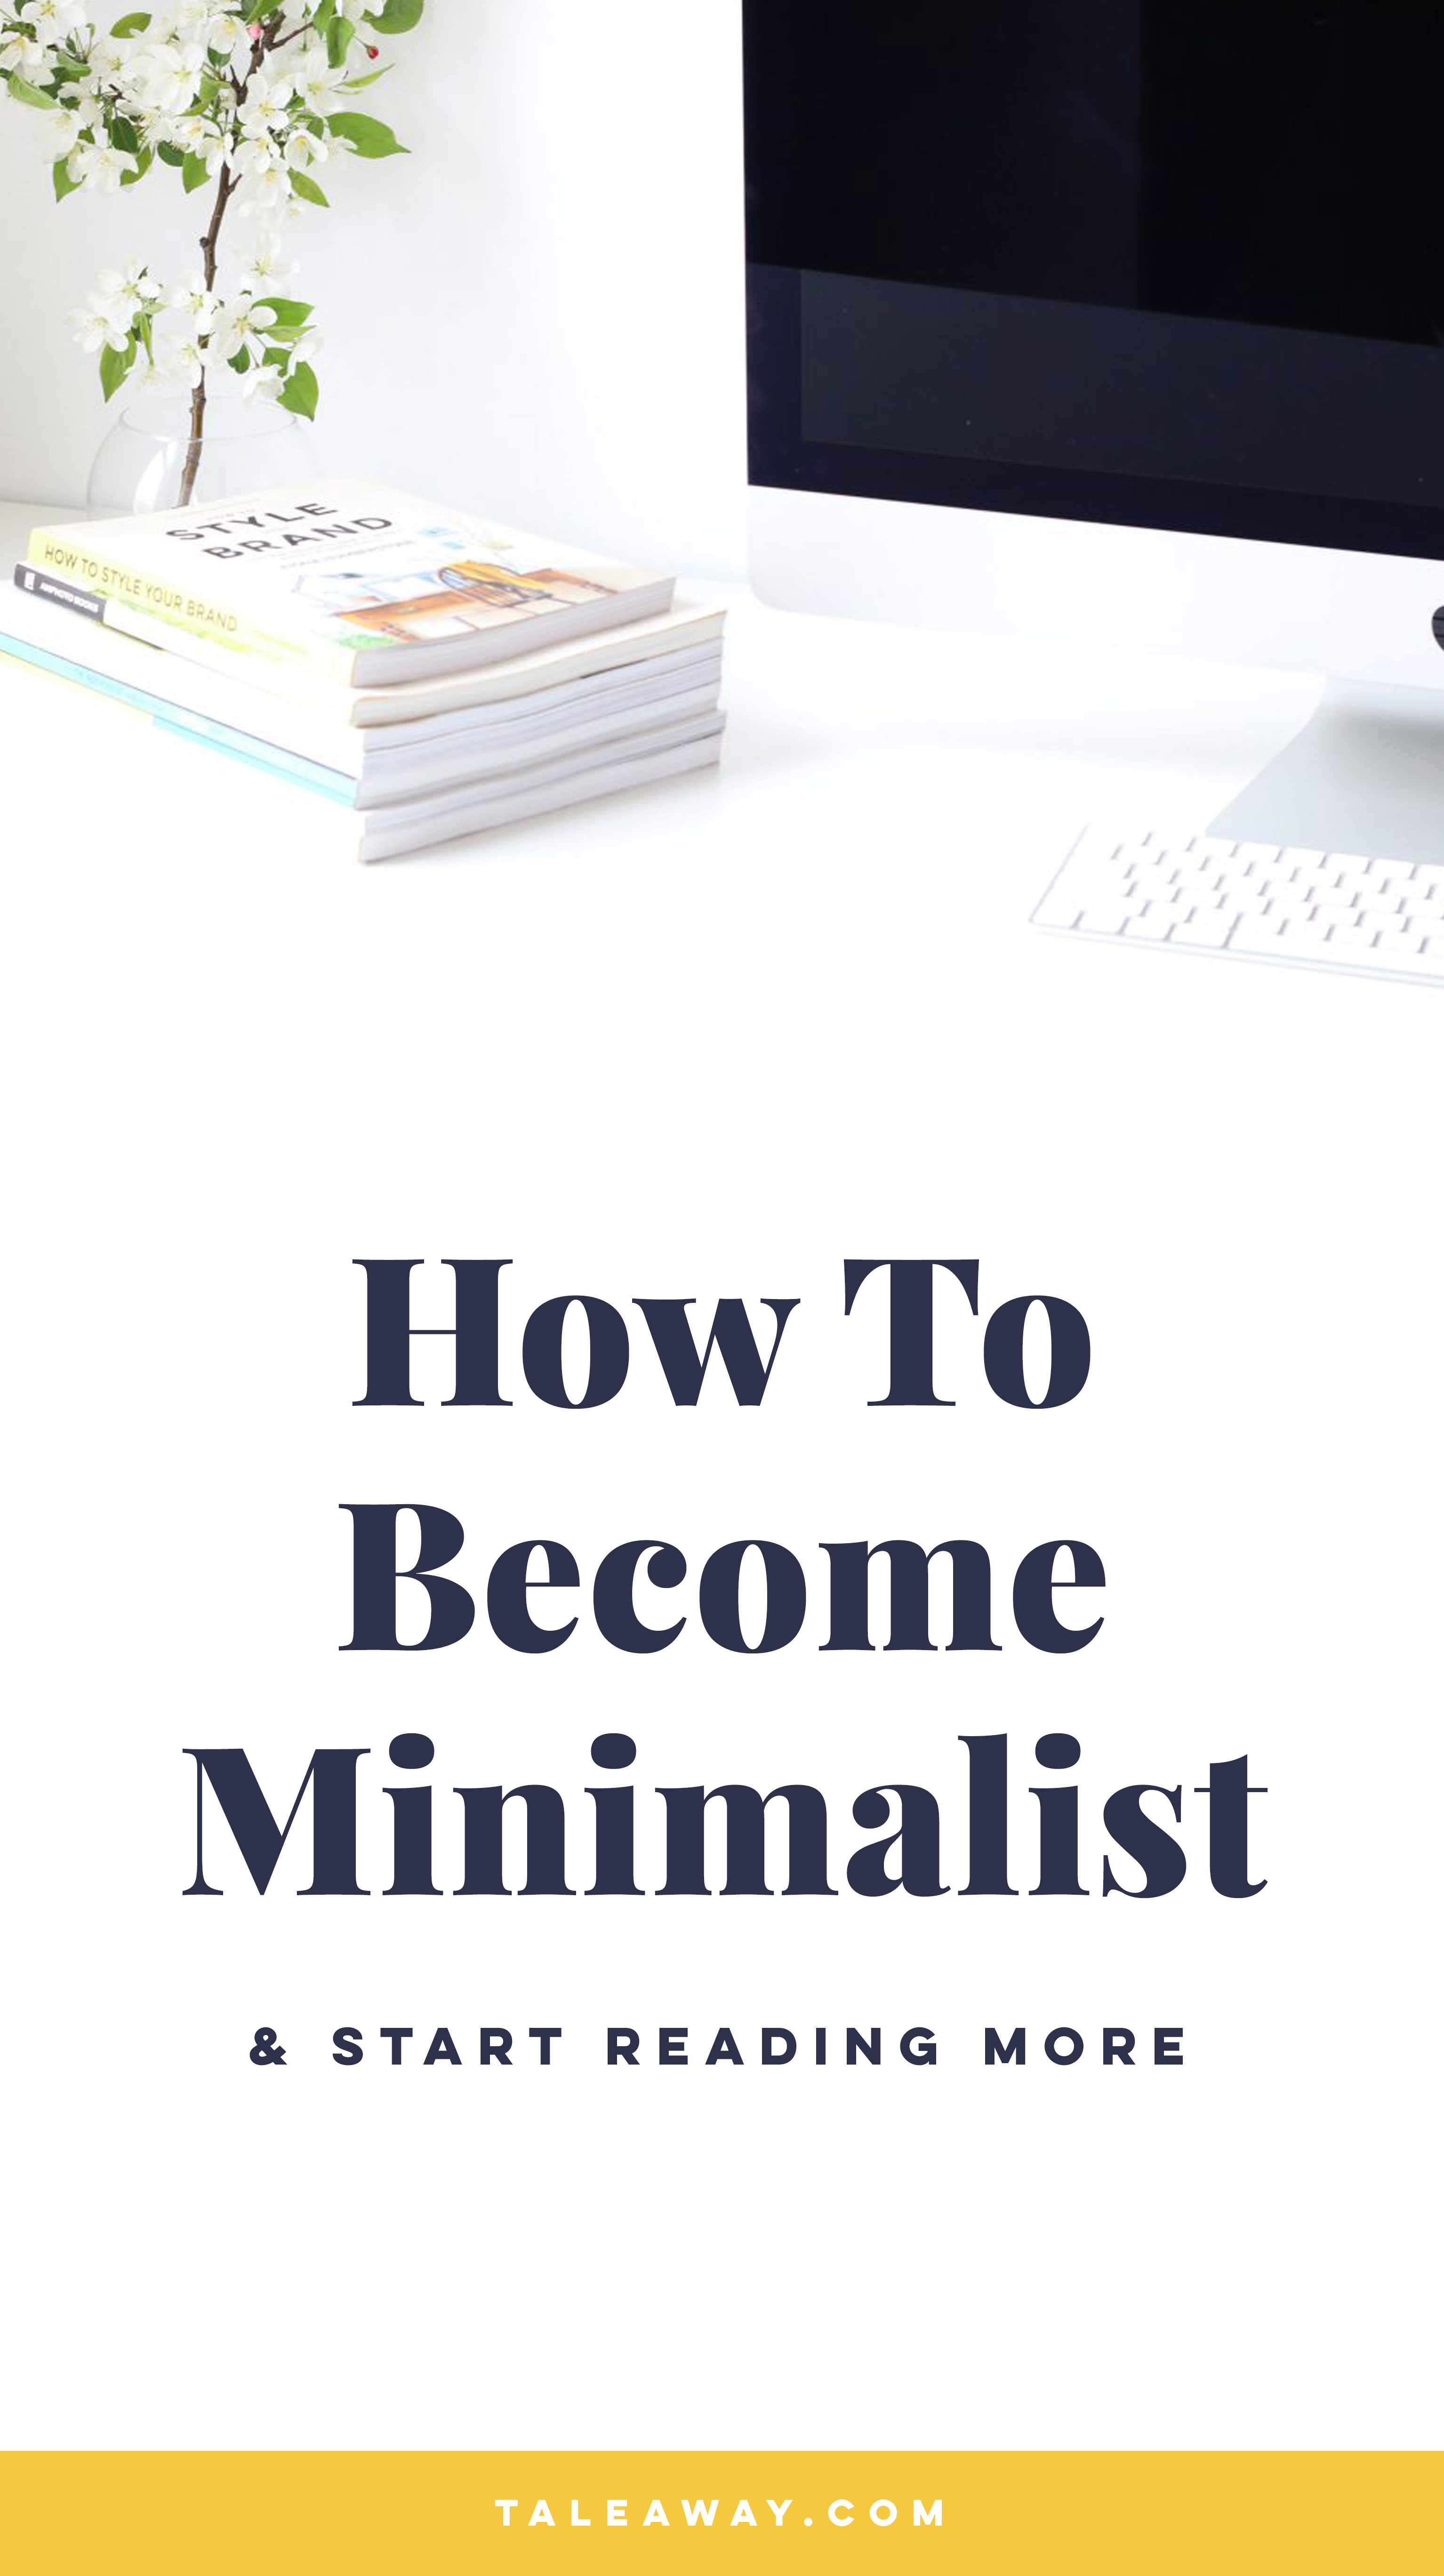 How To Become Minimalist and Start Reading More - A guide to minimalism for people who love books. For more reading ideas visit www.taleway.com to find books set around the world. Ideas for those who like to travel, both in life and in fiction. minimalism, books, minimalism books, how to become minimalist, minimalism lifestyle, minimalism home, minimalism for beginners, minimalism guide, minimalism how to, minimalism inspiration